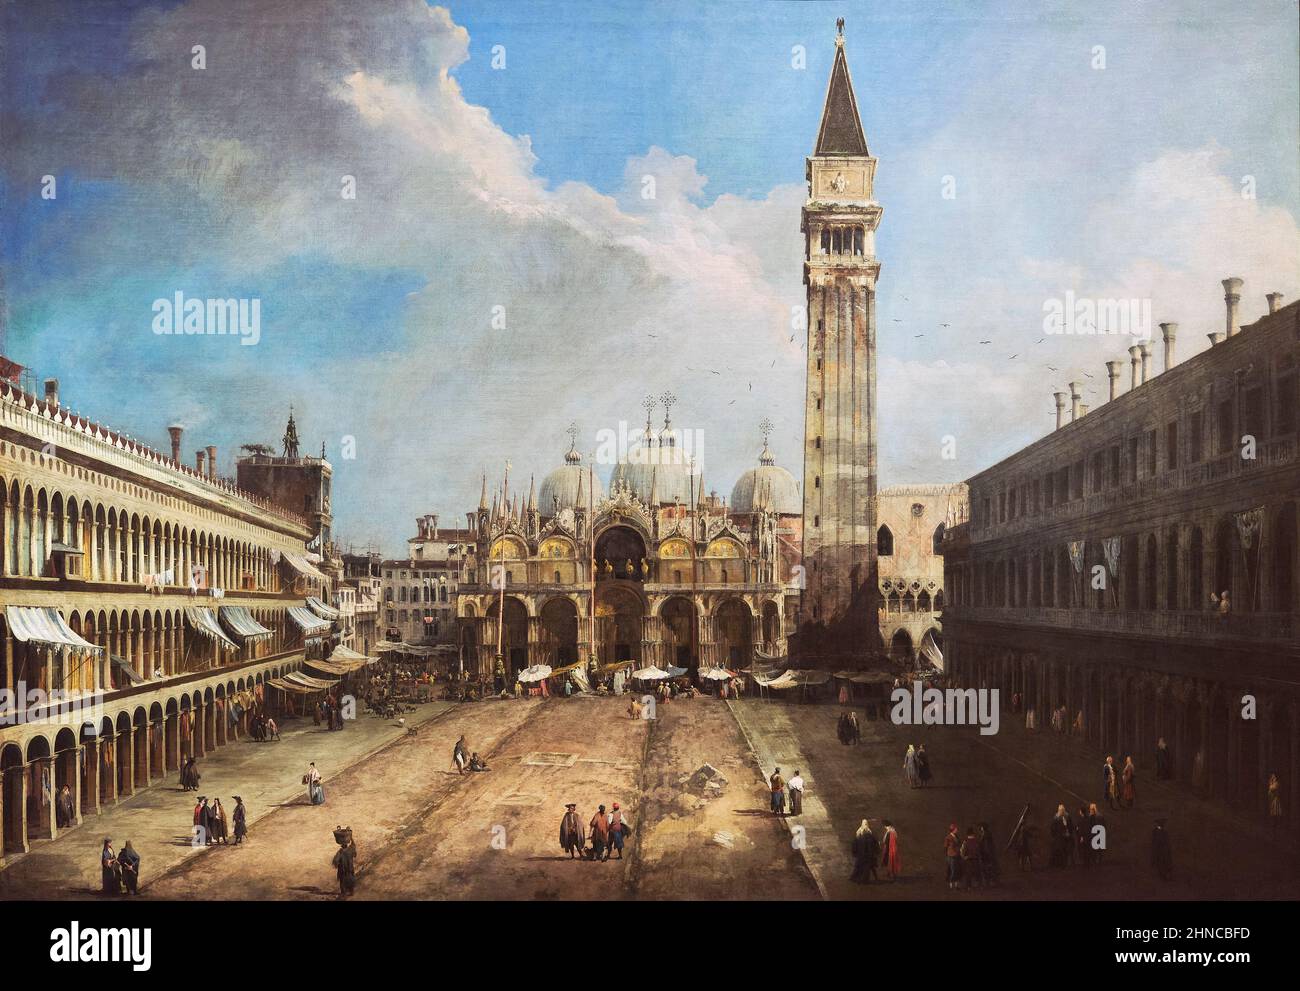 Canaletto (Giovanni Antonio Canal) (1697-1768). The Piazza San Marco in Venice. ca. 1723-1724. Oil on canvas. 141.5 x 204.5 cm.  Canaletto was an Ital Stock Photo